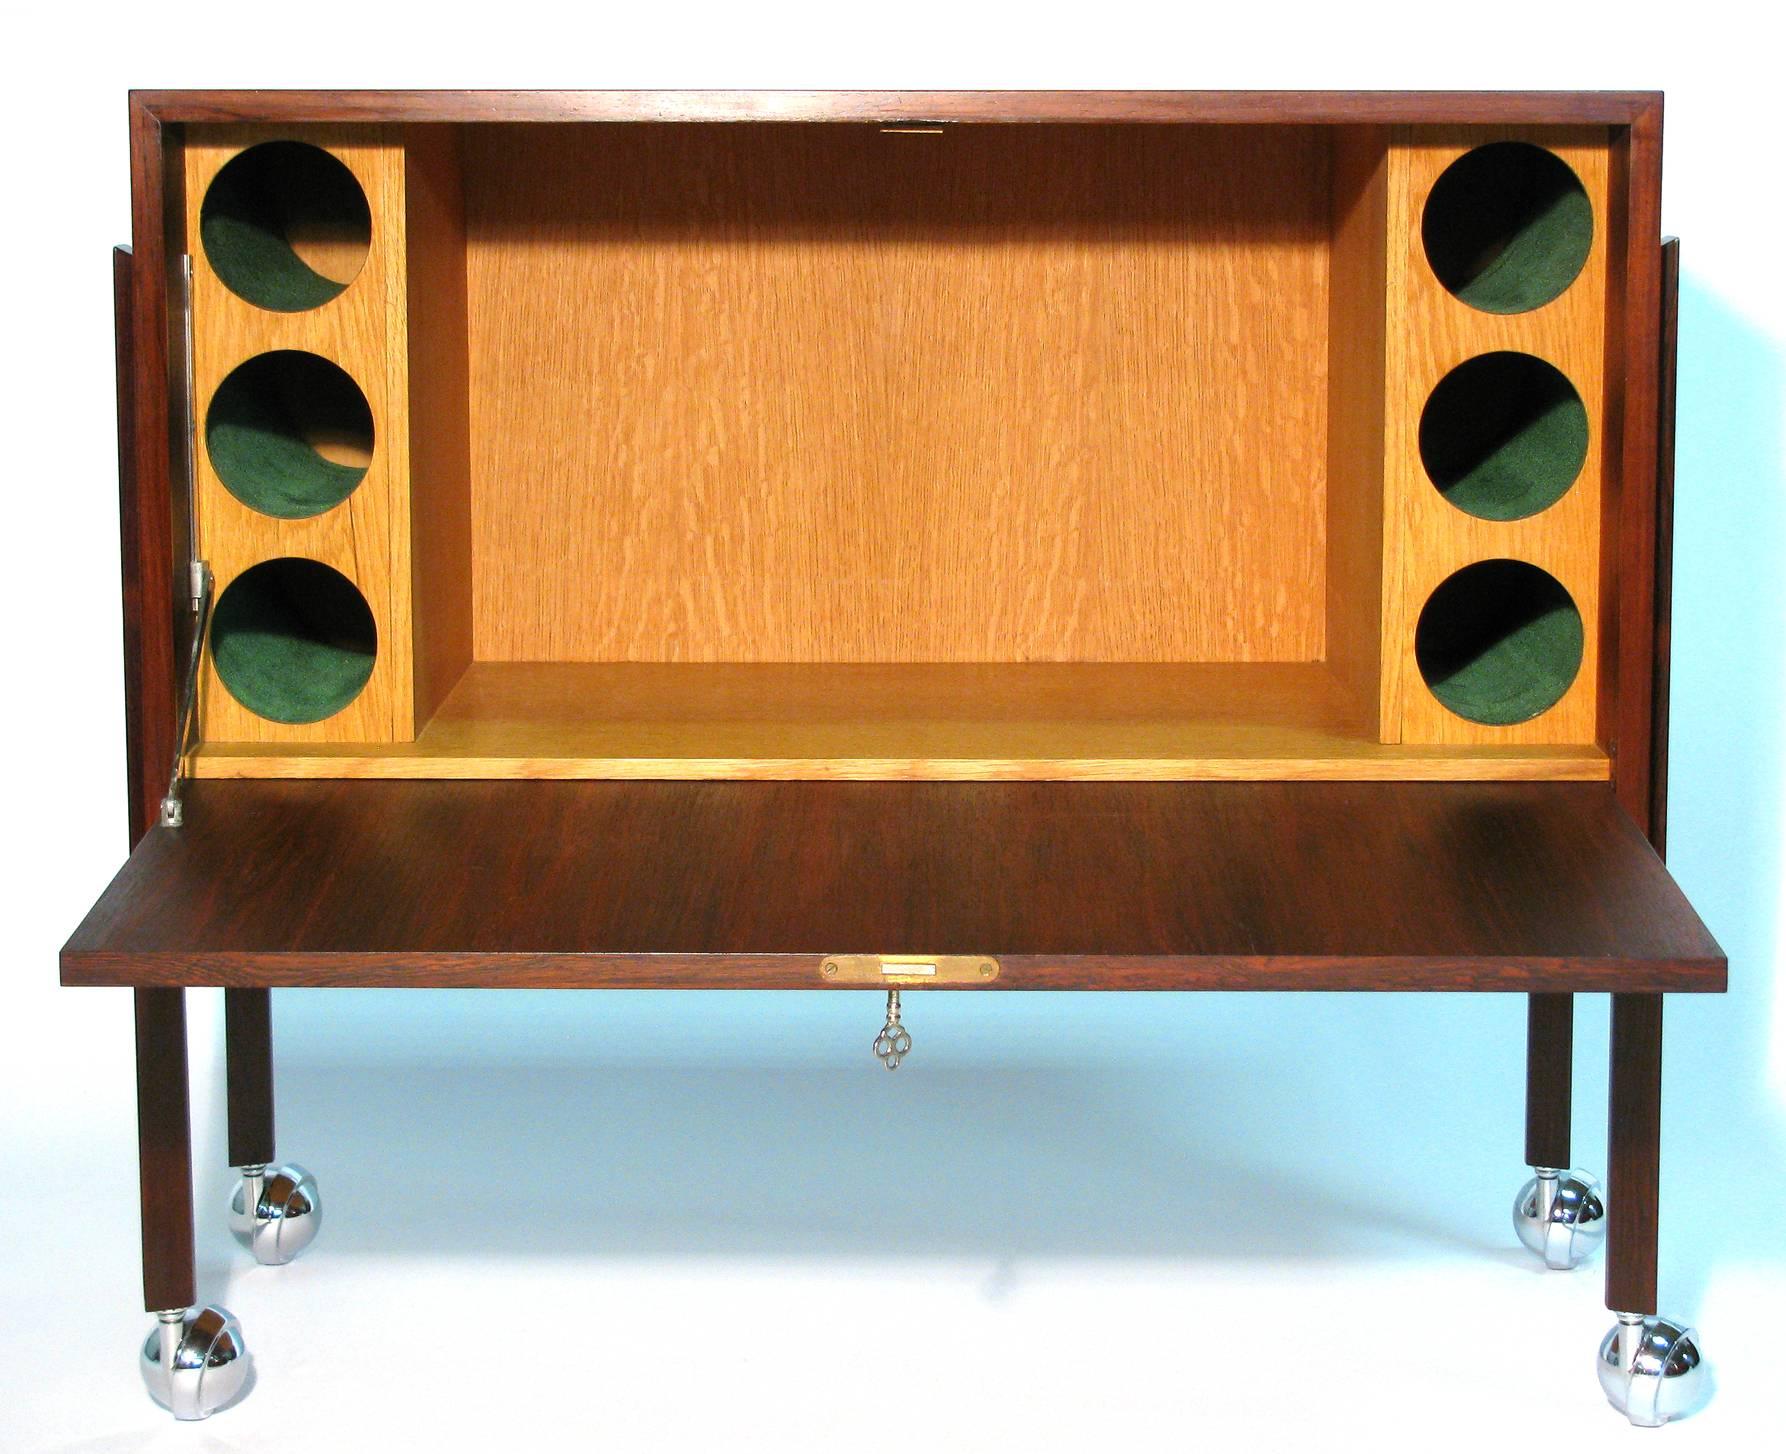 A modernist design liquor cabinet with exceptional book-matched rosewood. Rectangular in form case, suspended by four mounted triangular post legs on chrome ball wheels. The locking drop front opens to reveal a fitted oak interior for storing bar